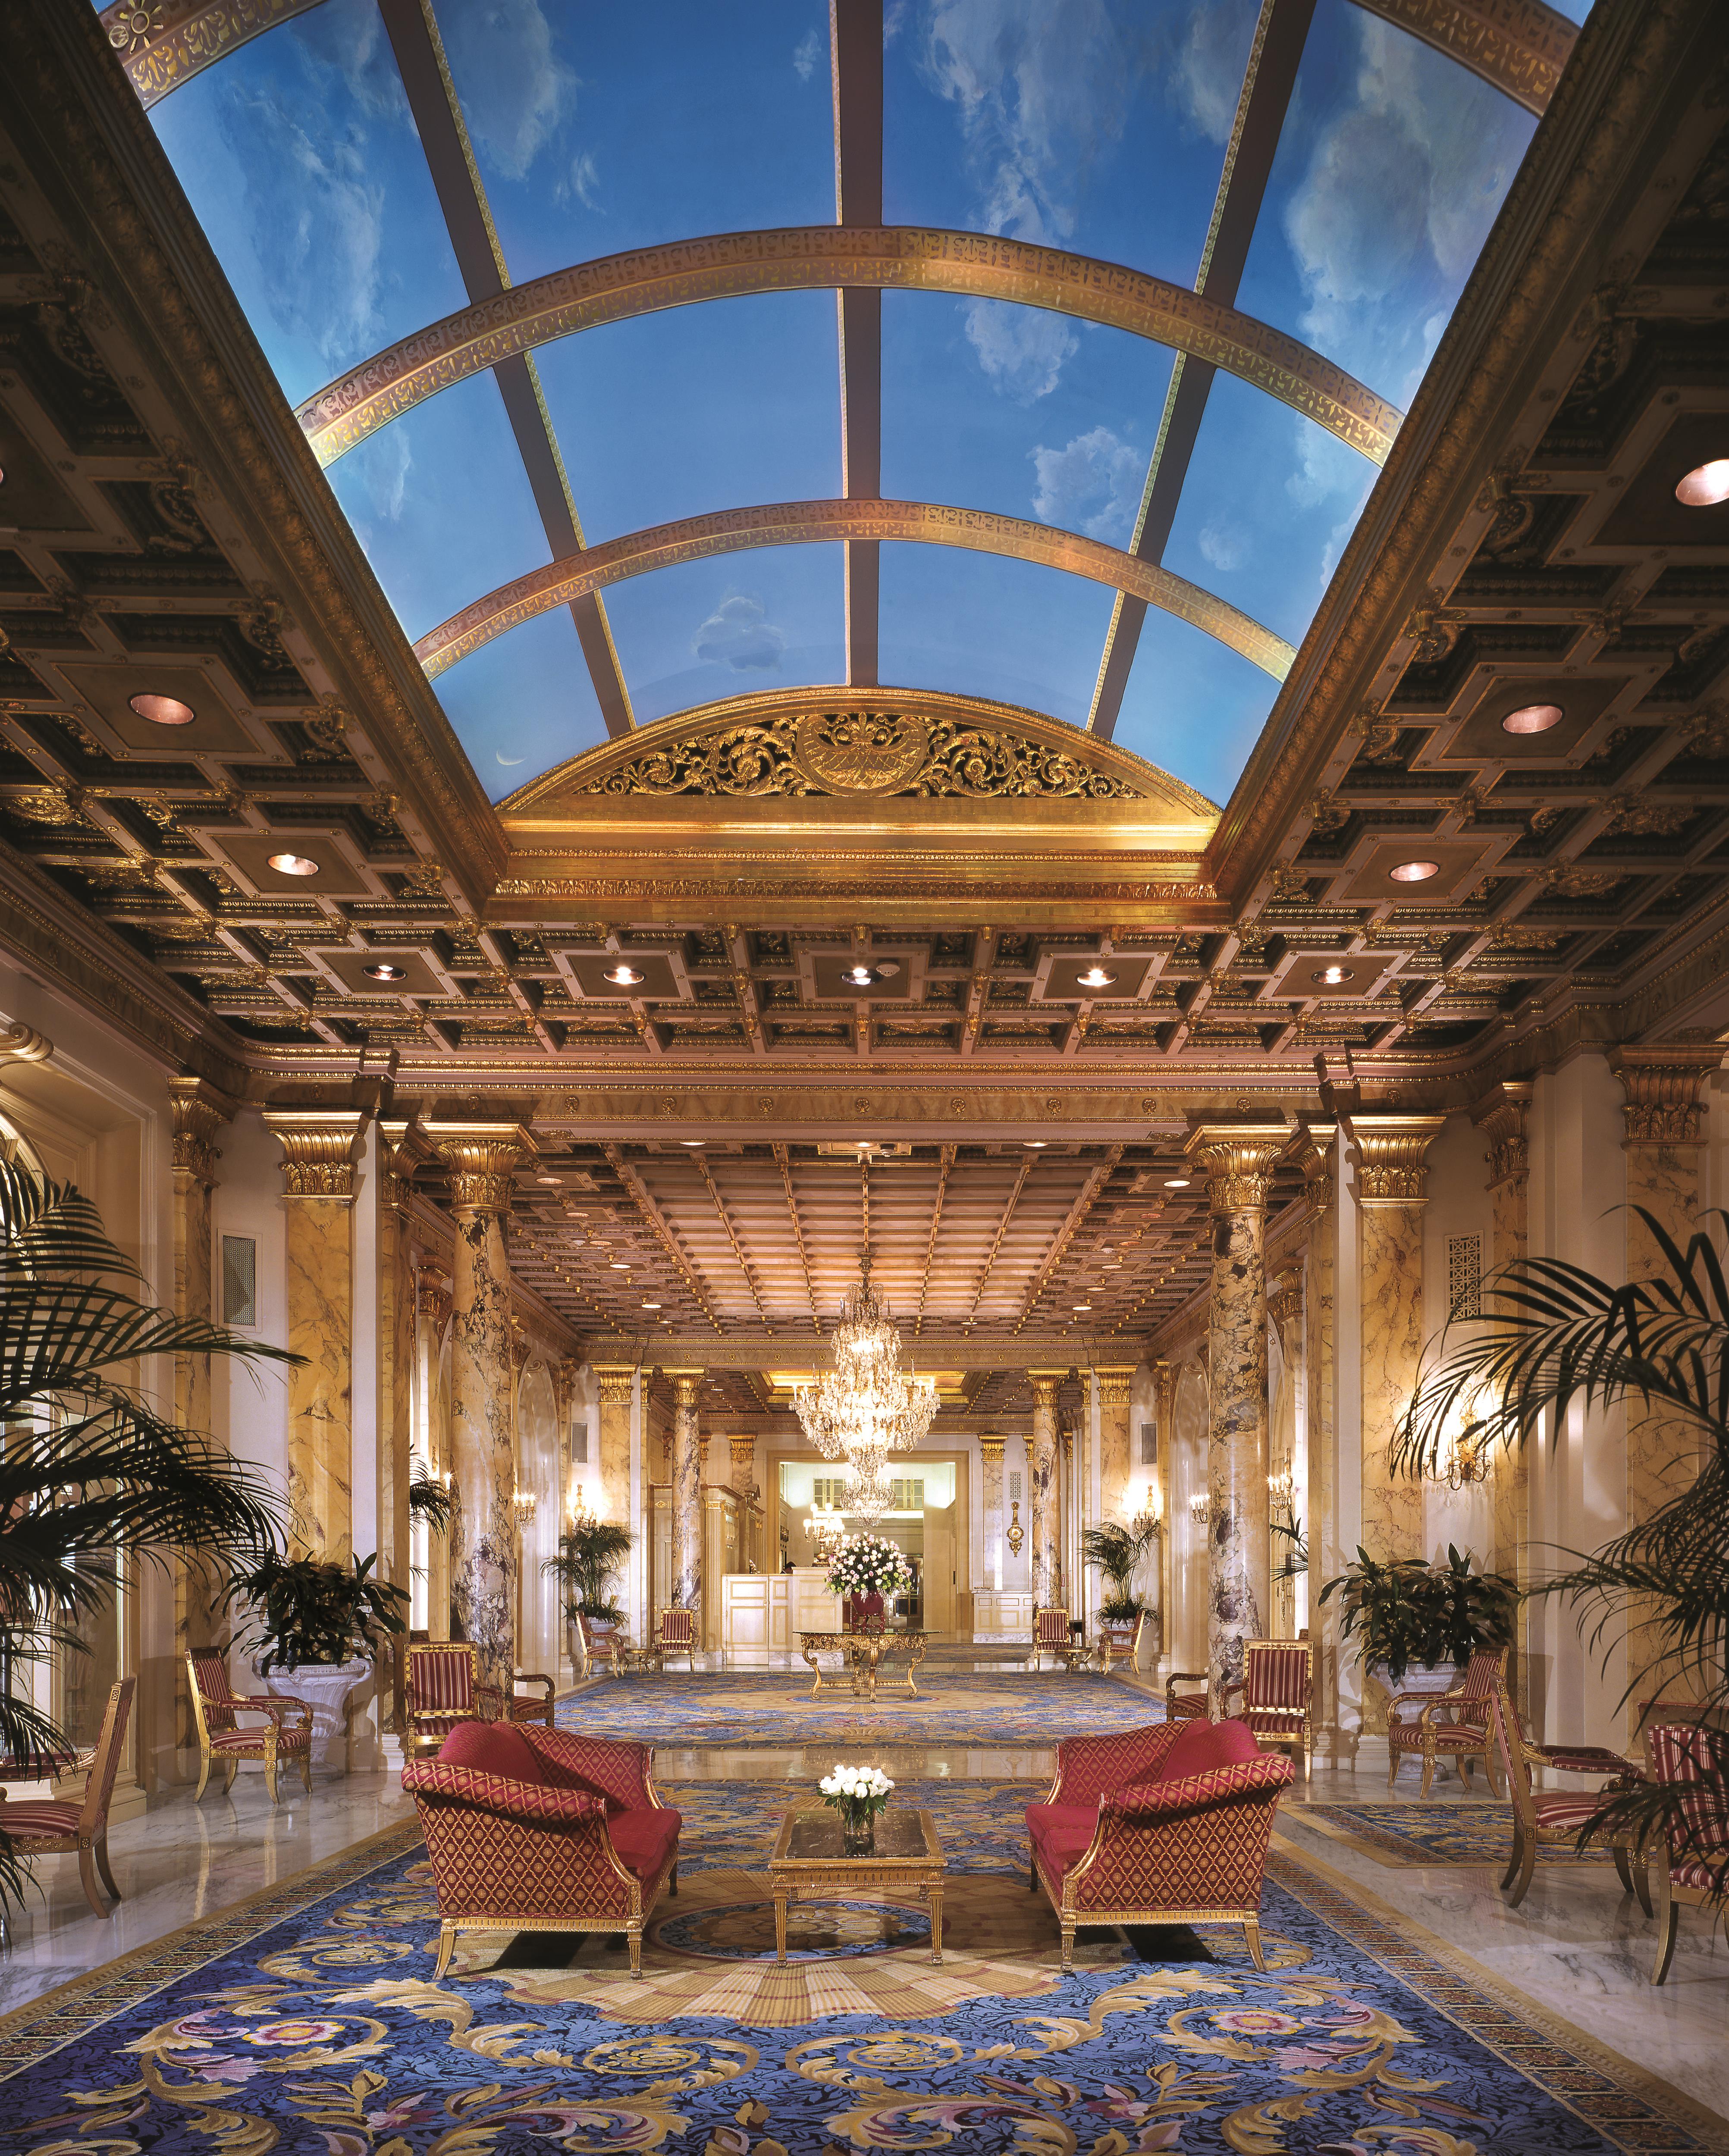 Fairmont Copley Plaza's gilded lobby and grand spaces have come to define glamour to generations of Bostonians.